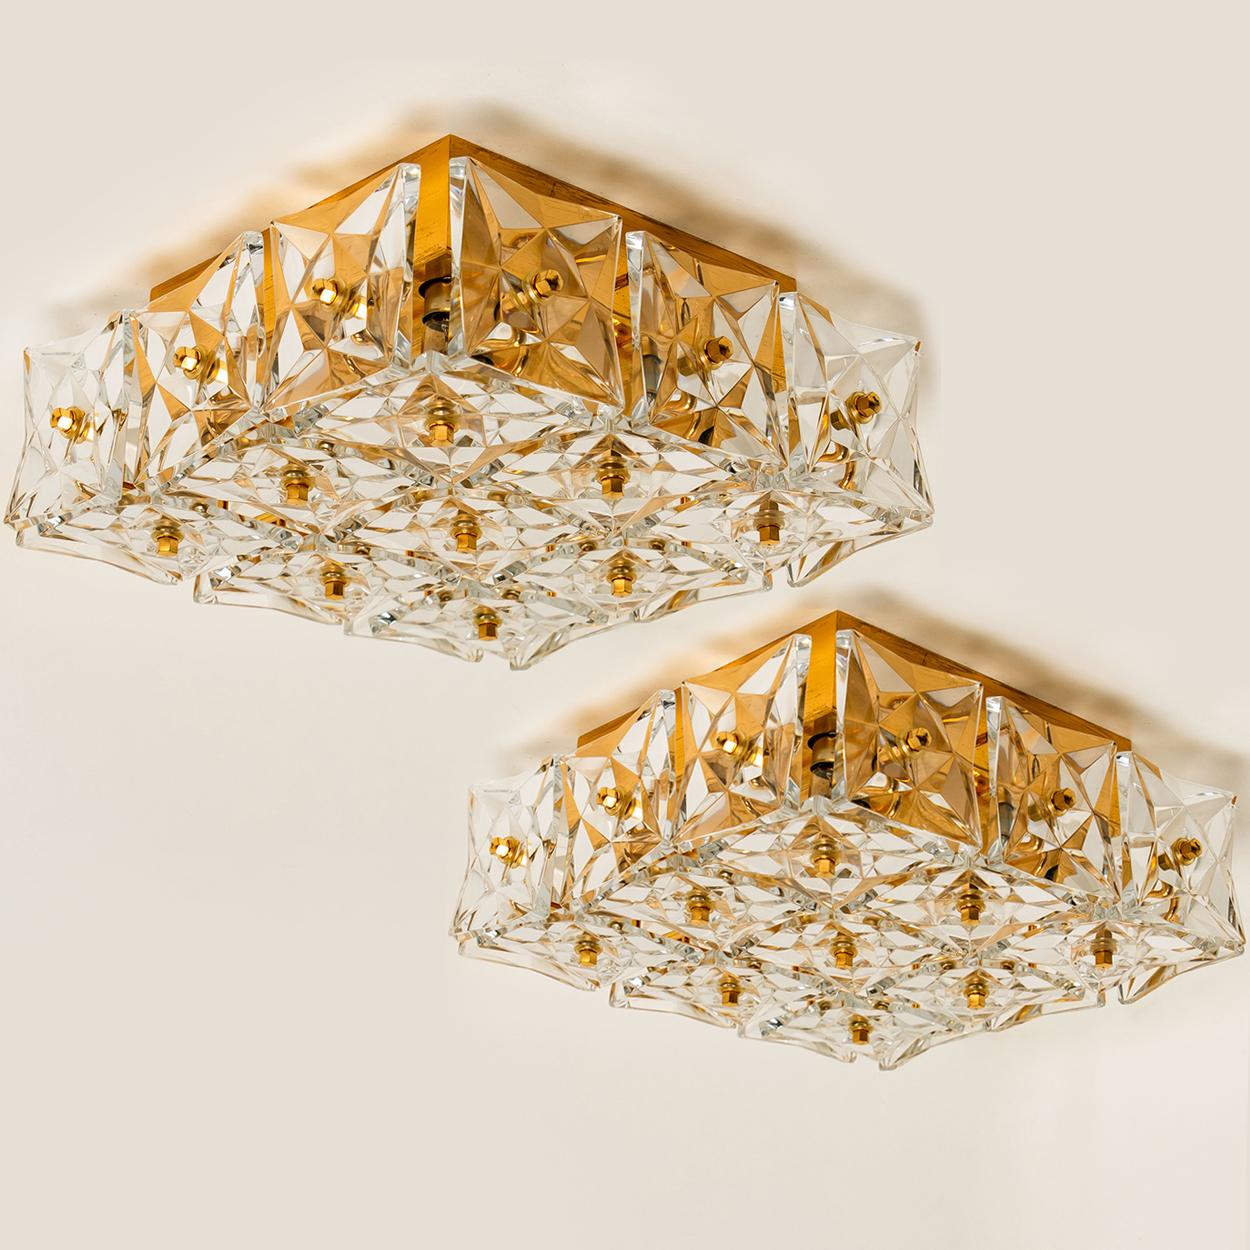 1 of the 2 Gold-Plated Kinkeldey Crystal Glass Wall Lights or Flush Mount 1970s For Sale 4